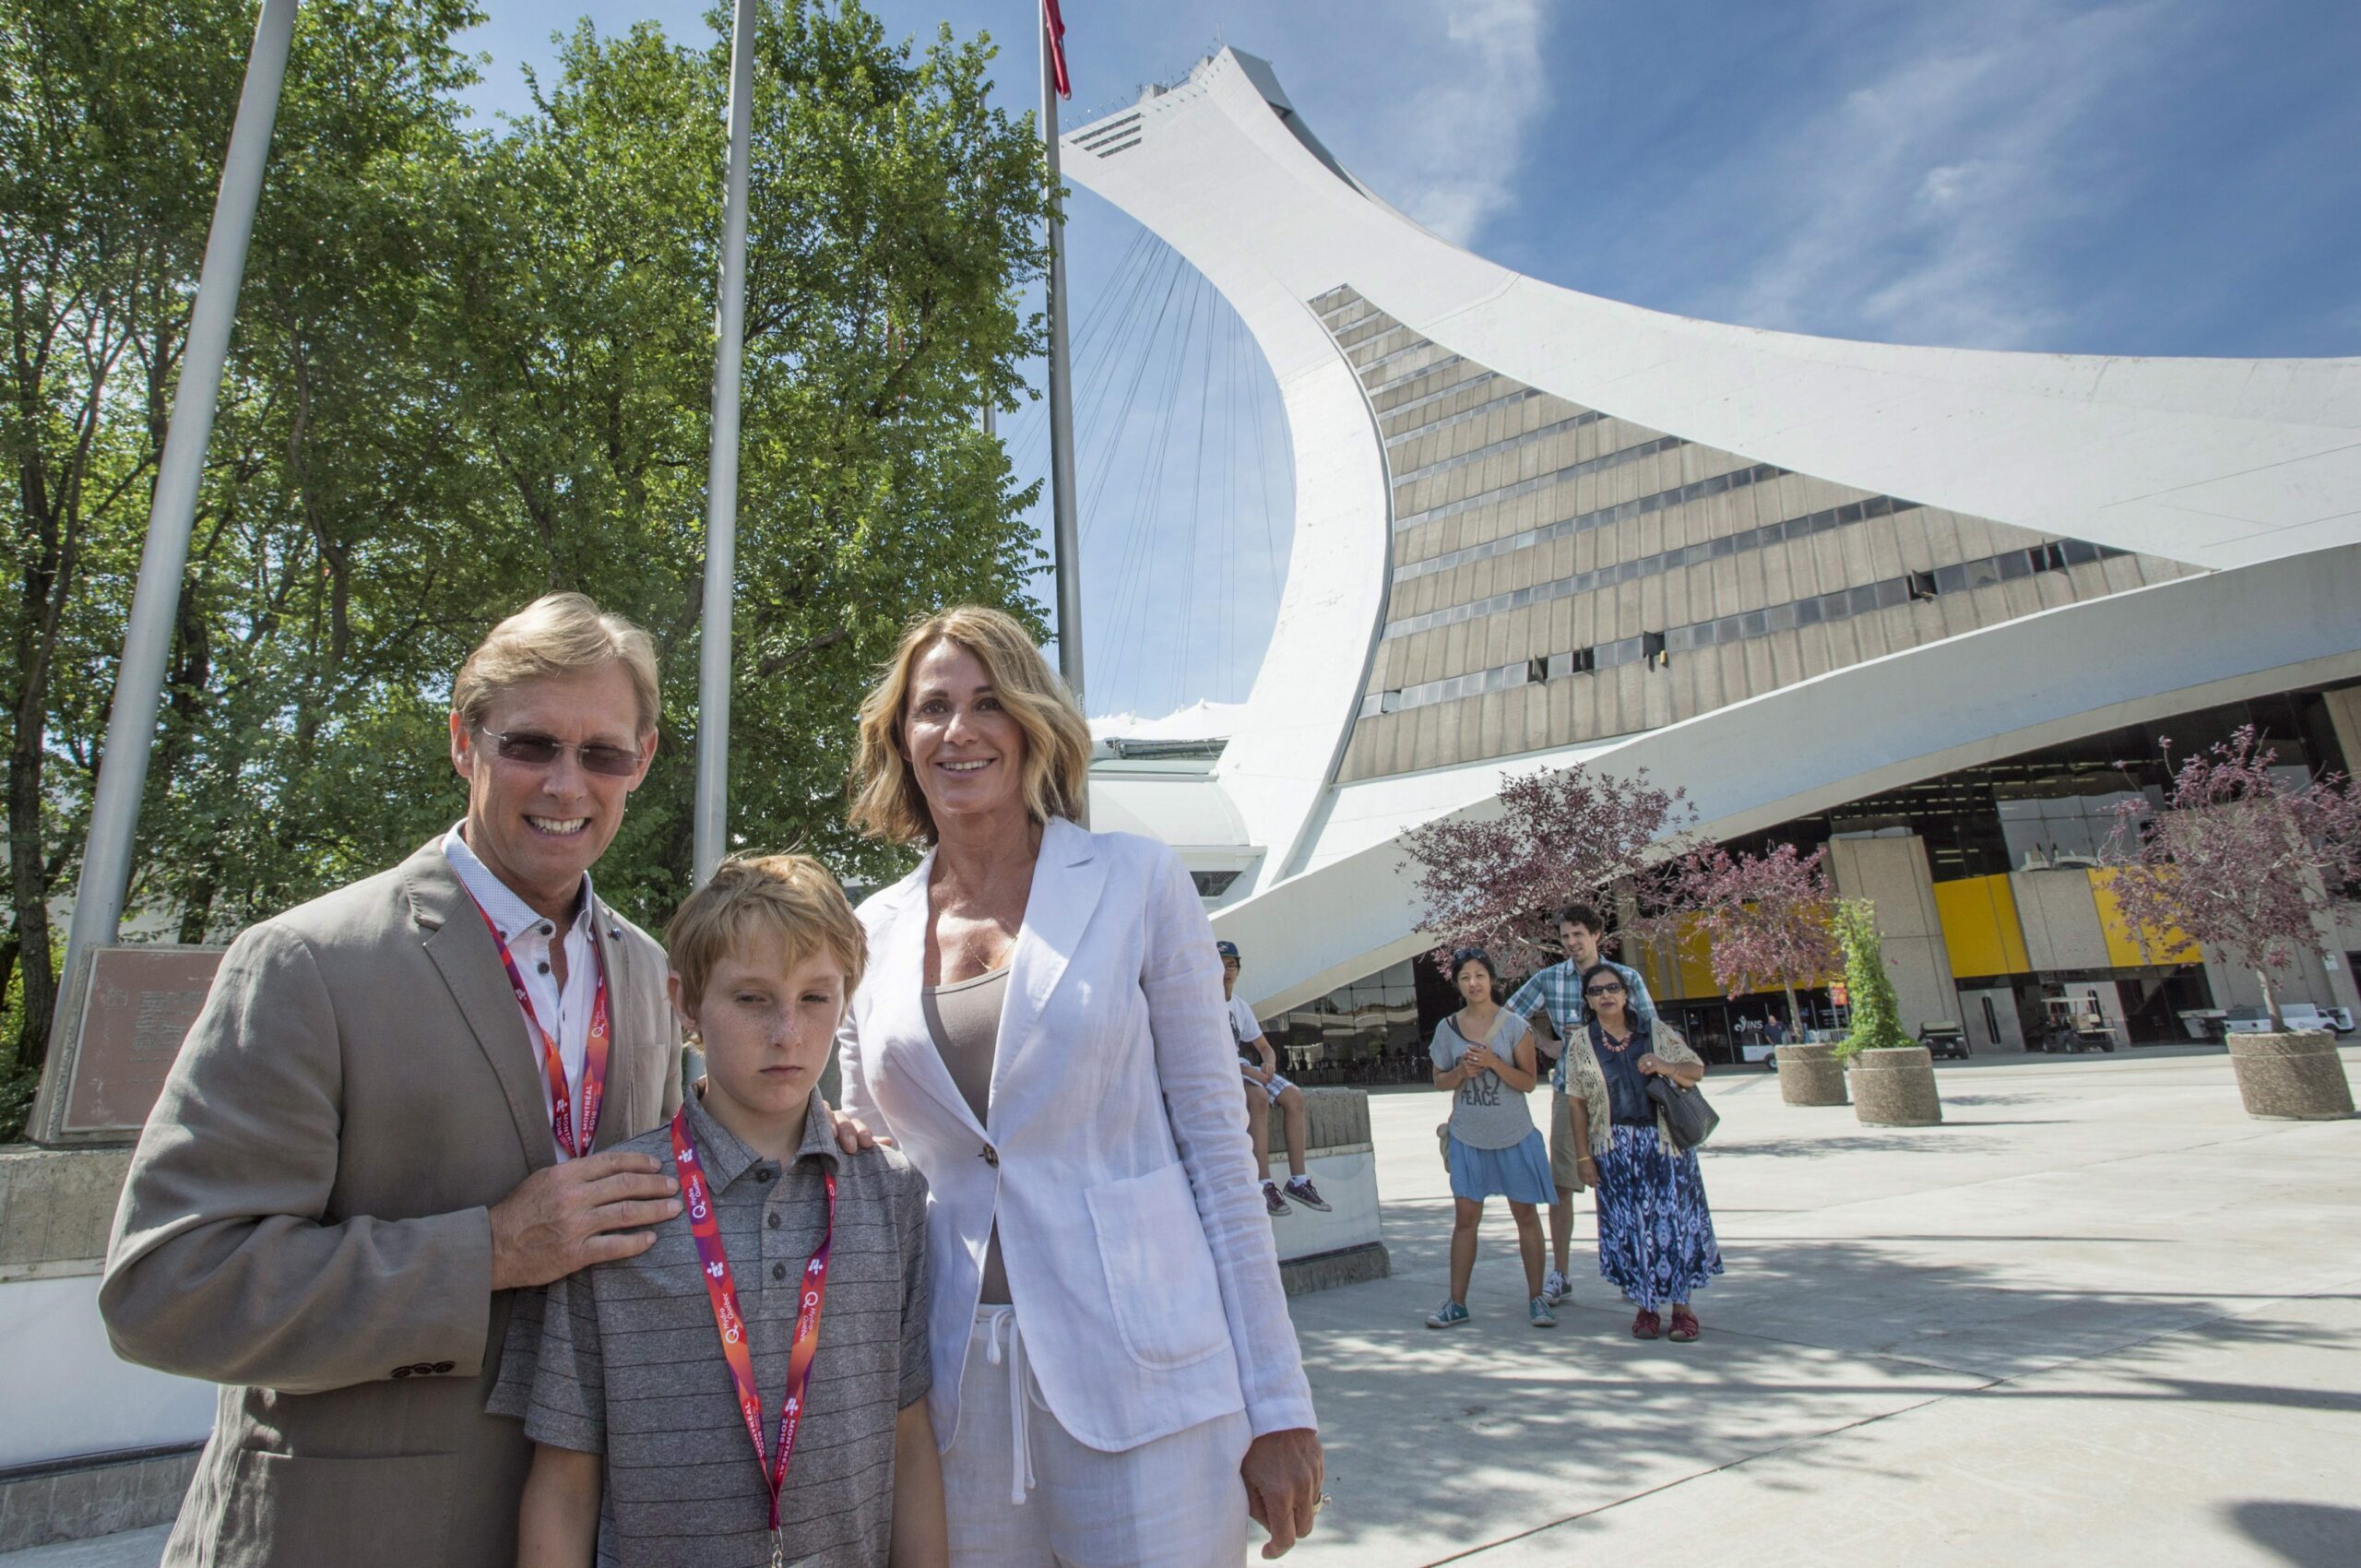 Montreal 1976 Olympics gymnastics champion Nadia Comaneci, her husband Bart Conner and their son Dylan stand next to Olympic Stadium as she tours a exhibit marking the 40th anniversary of the Games Thursday, July 21, 2016 in Montreal. Photo by Paul Chiasson/The Canadian Press/ ABACAPRESS.COM